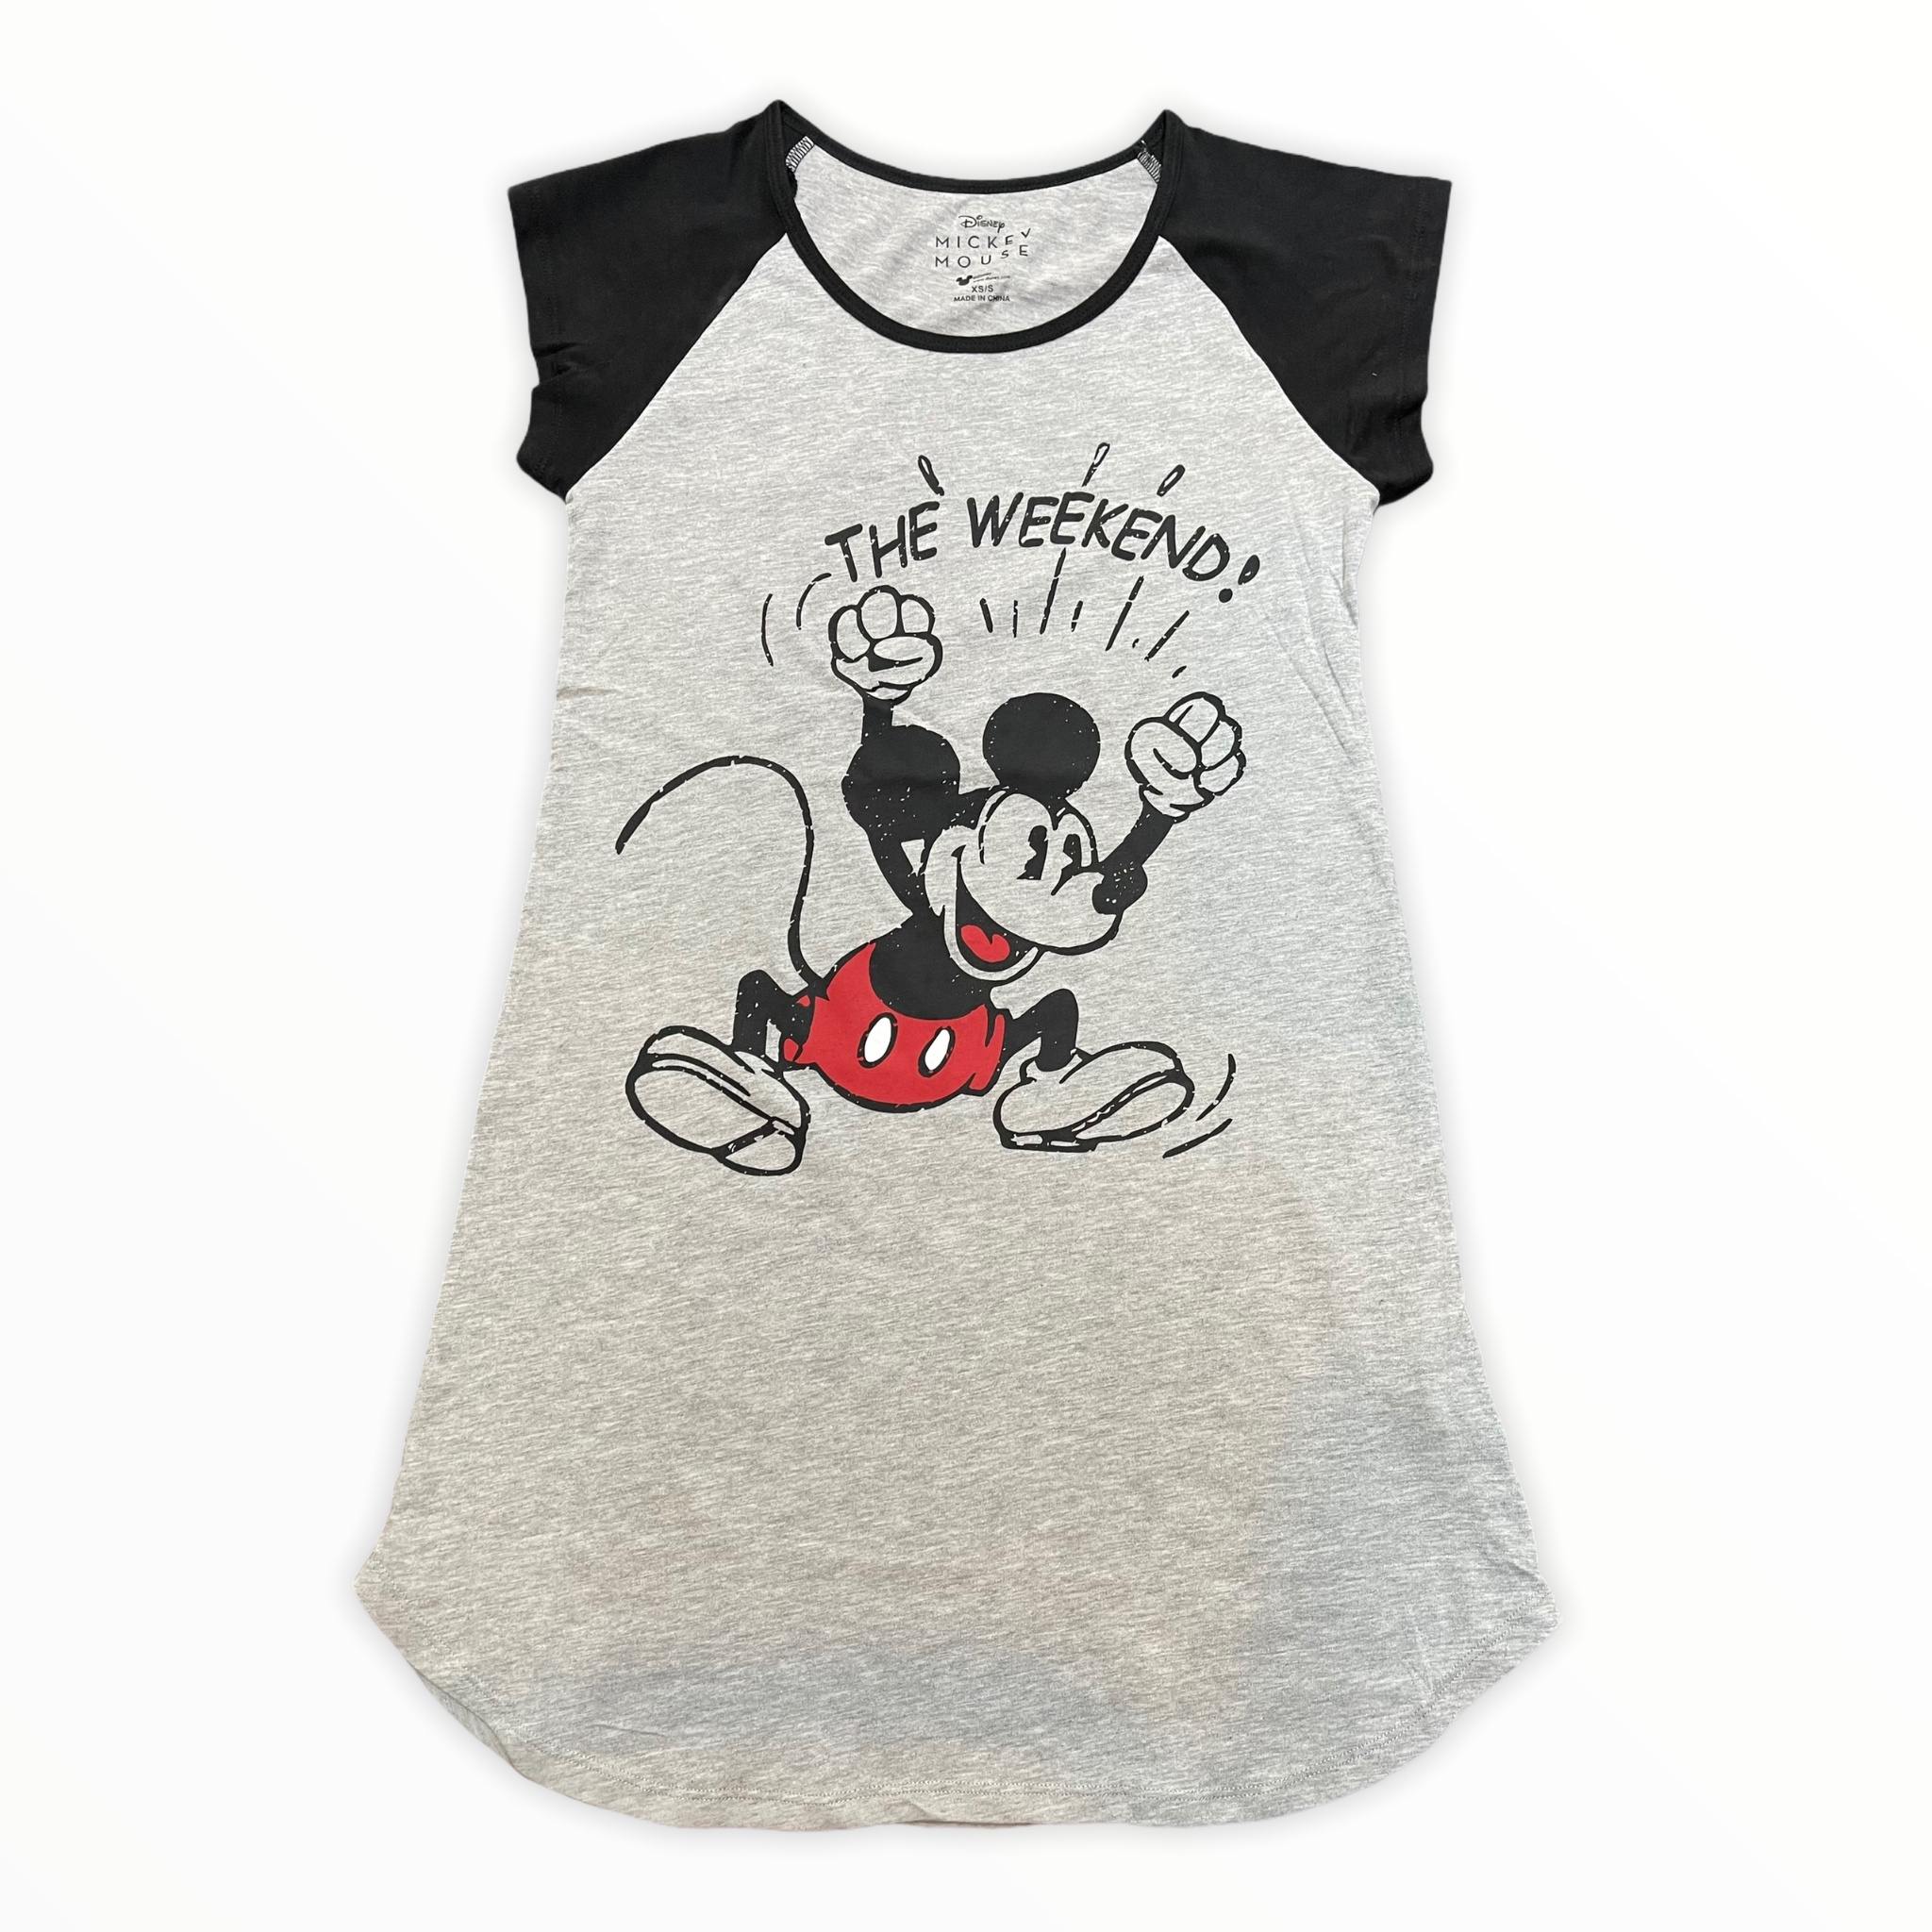 Disney Mickey Mouse "The Weekend" Womens Dorm Shirt